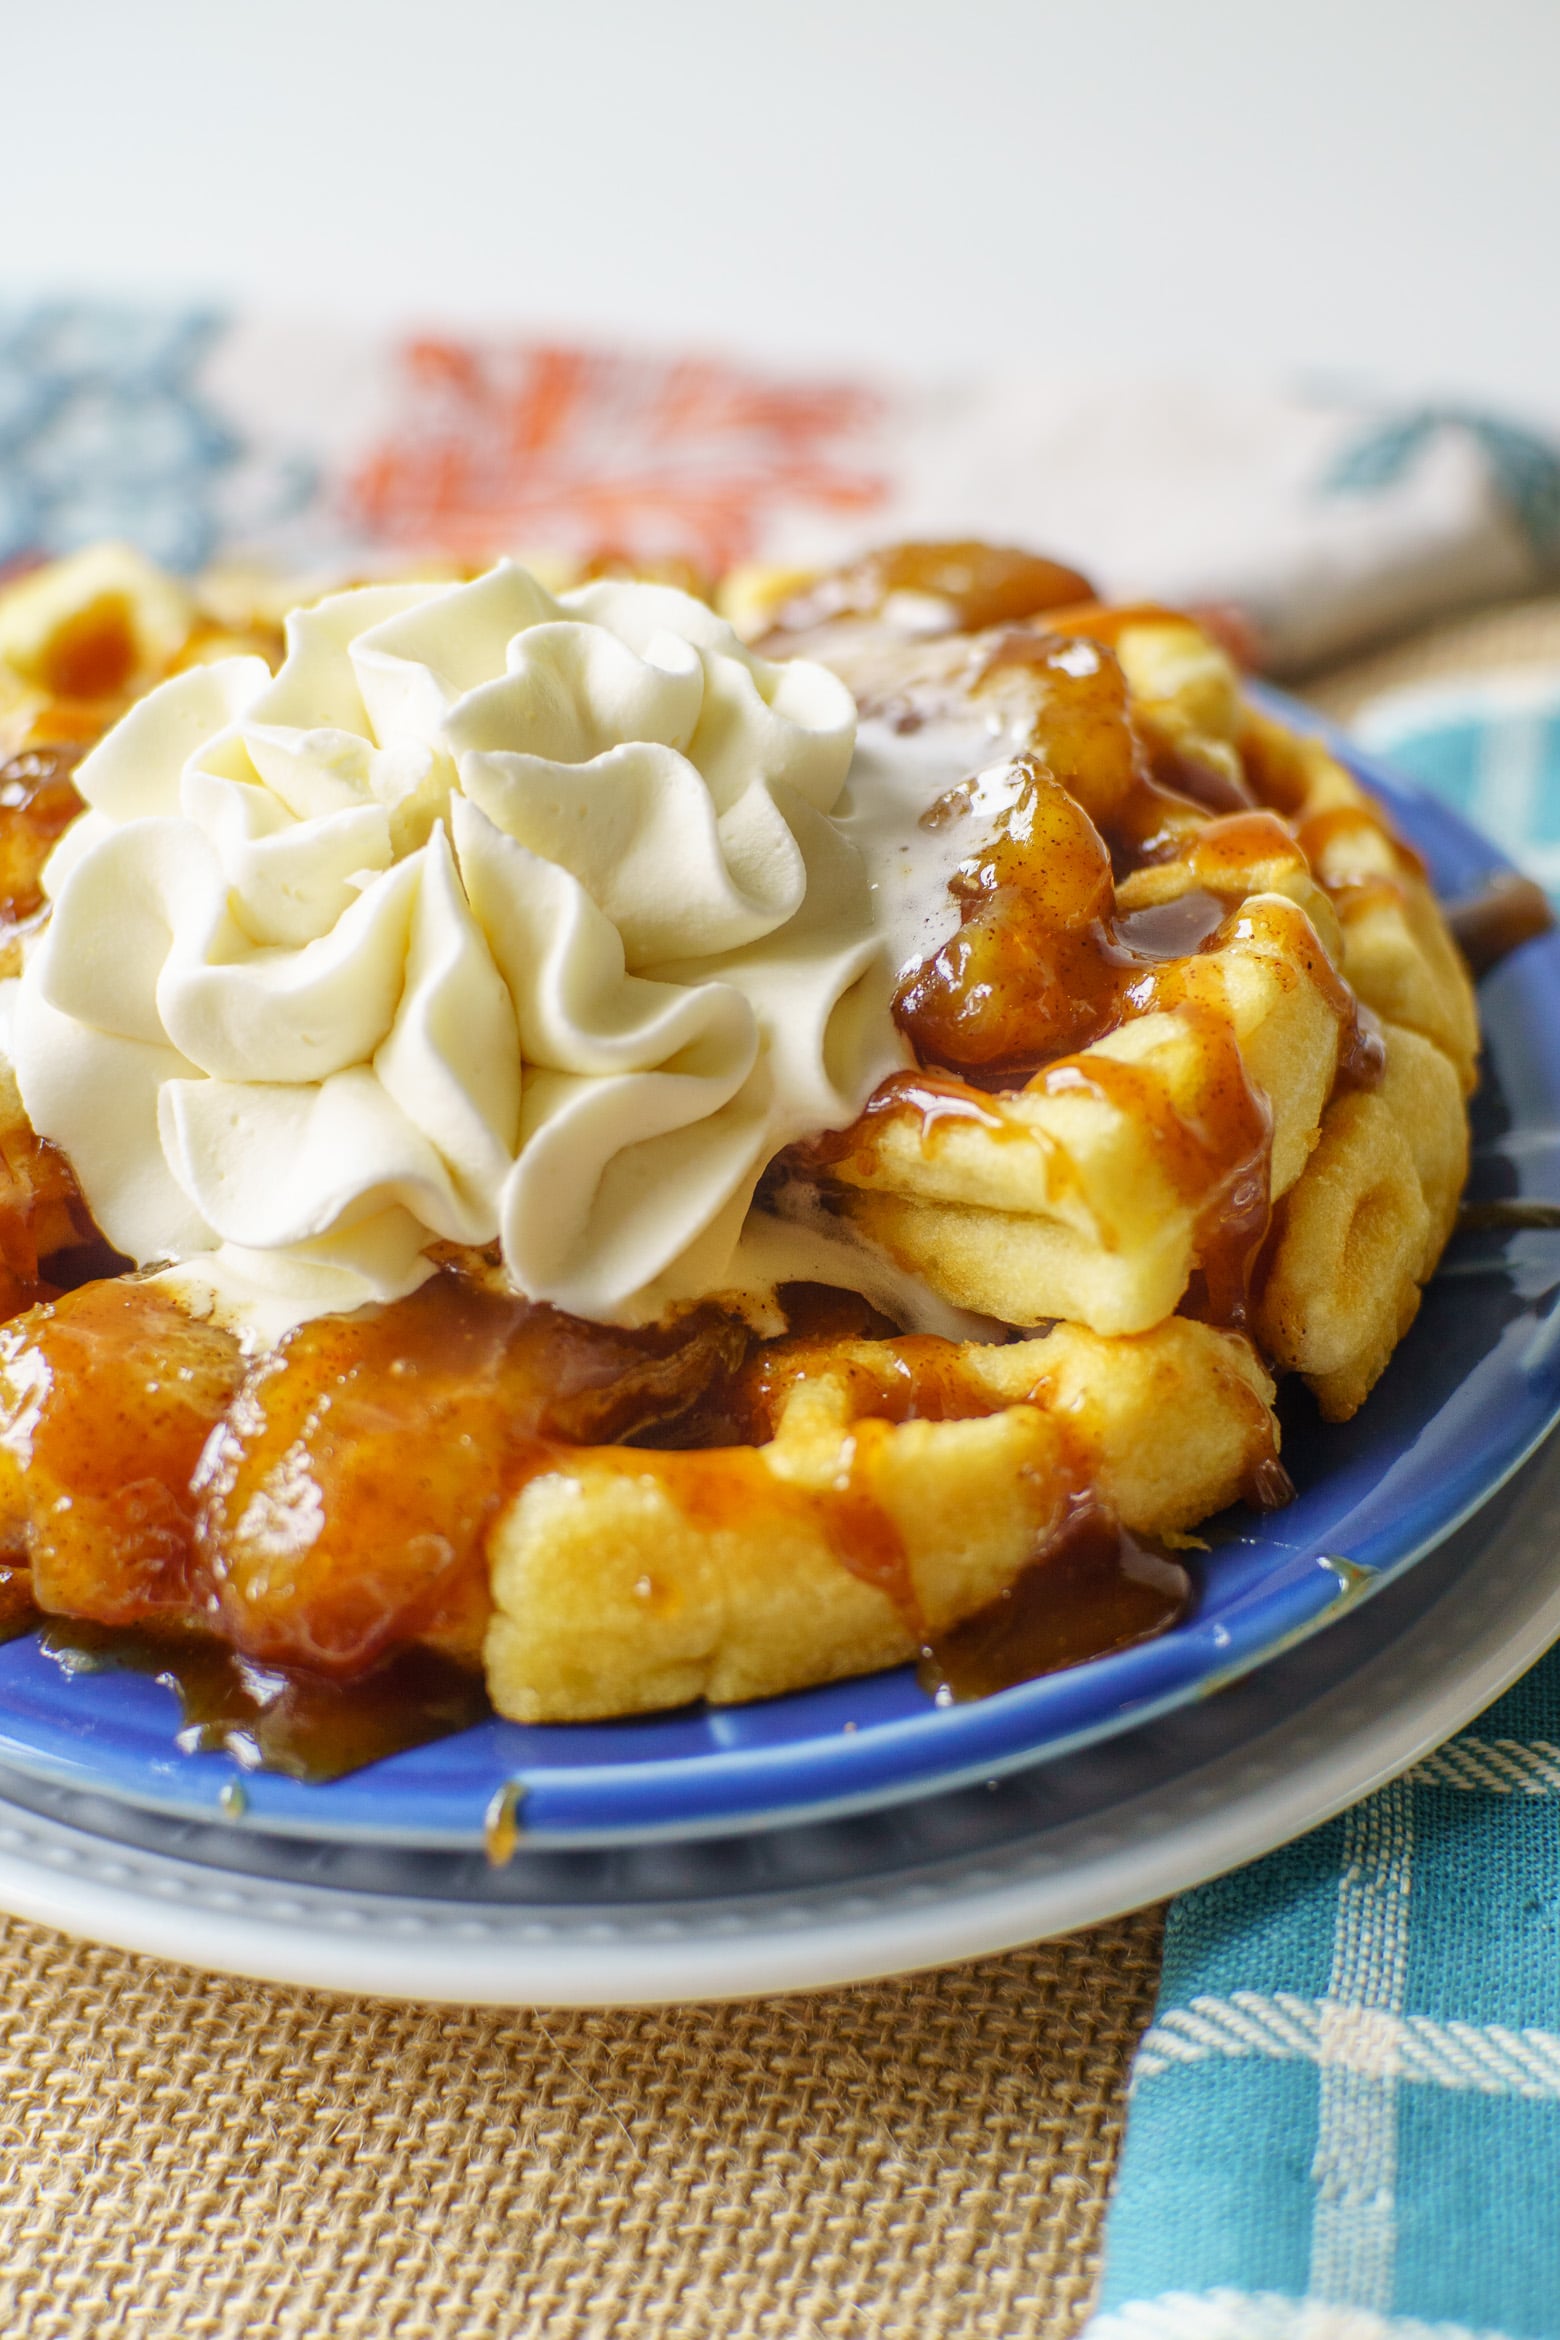 Perfect waffle recipe with a secret ingredient! Top with caramelized bananas for a special treat! via @mrsmajorhoff